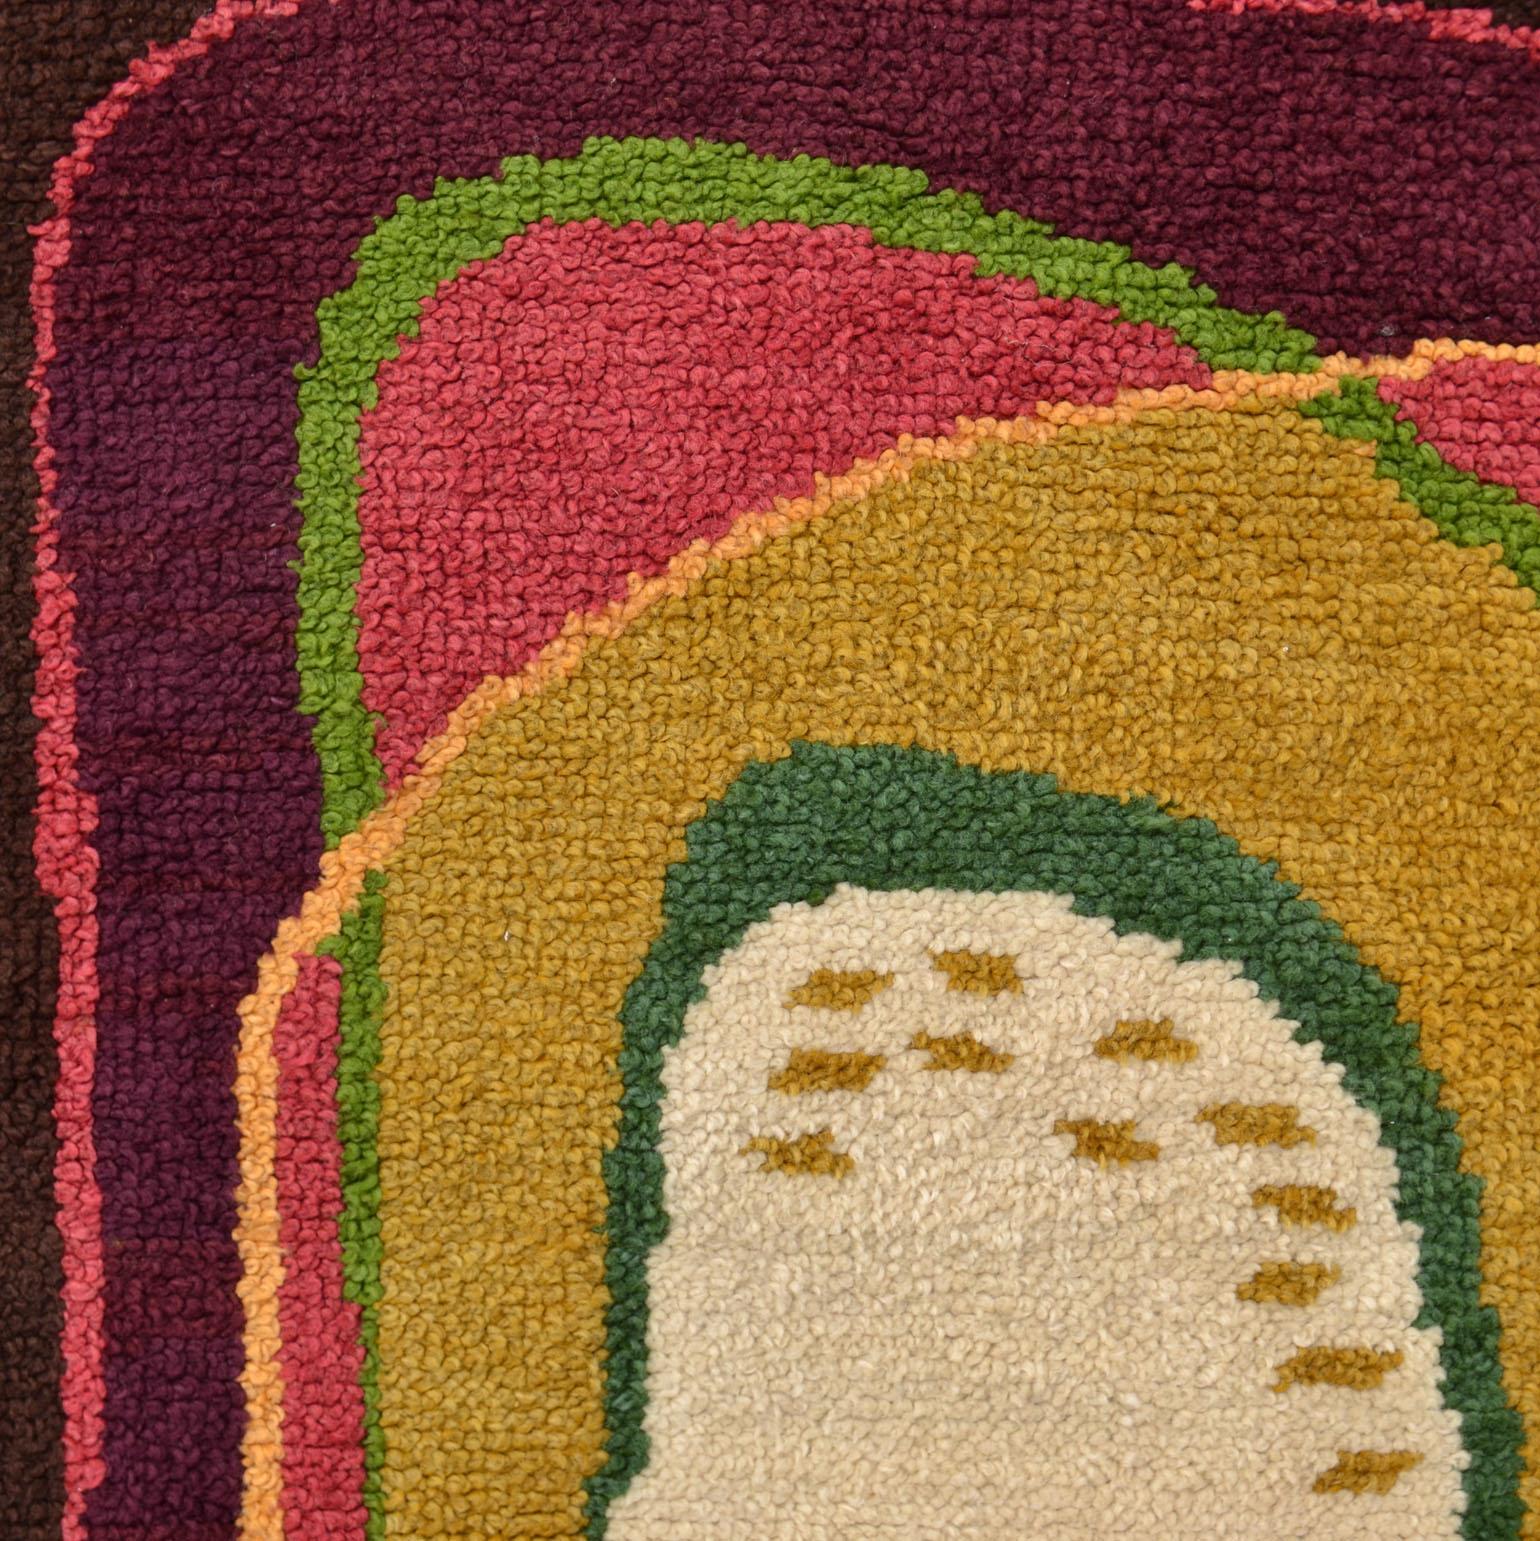 Mid-Century Modern wool hand tufted pile rug is like an abstract expressive painting of circular overlapping swirls of changing colors, Europe circa 1950. The ingenious color variations create a strong counter change pattern of curvaceous shapes.